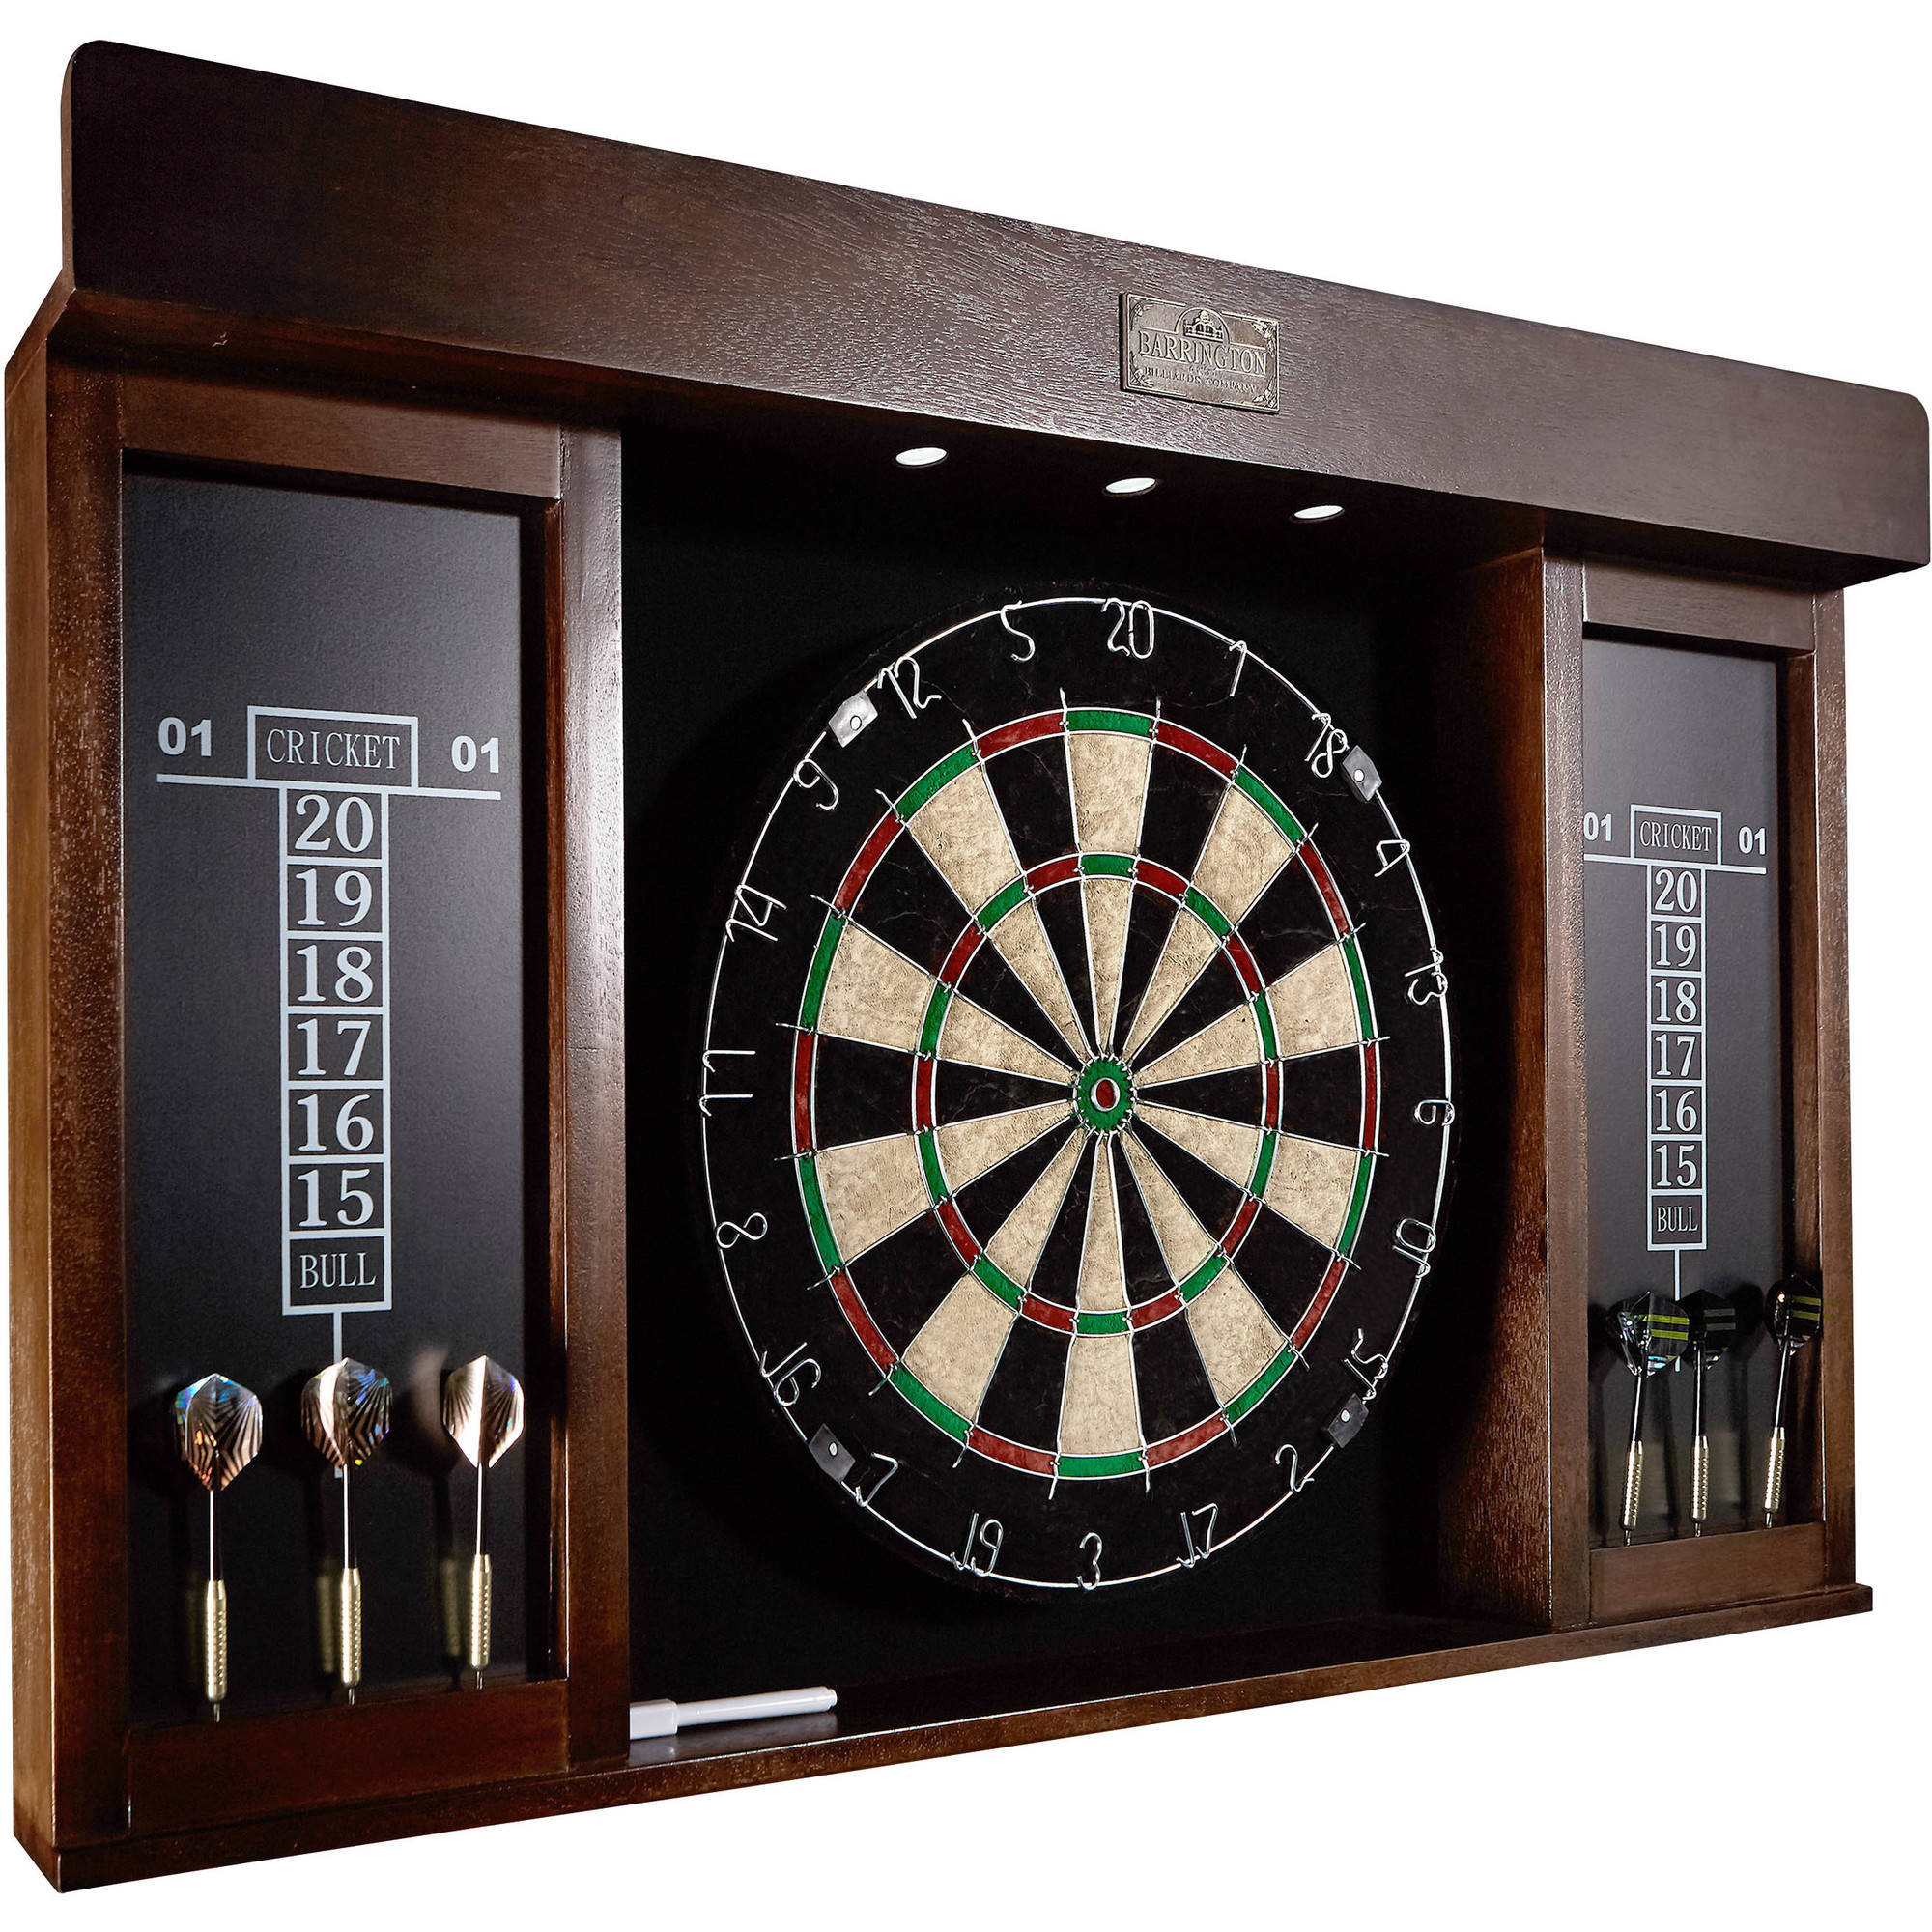 Barrington 40 inch Dartboard Cabinet with LED Lights, 40 inch x 4.375 inch x 24.625 inch - image 1 of 11